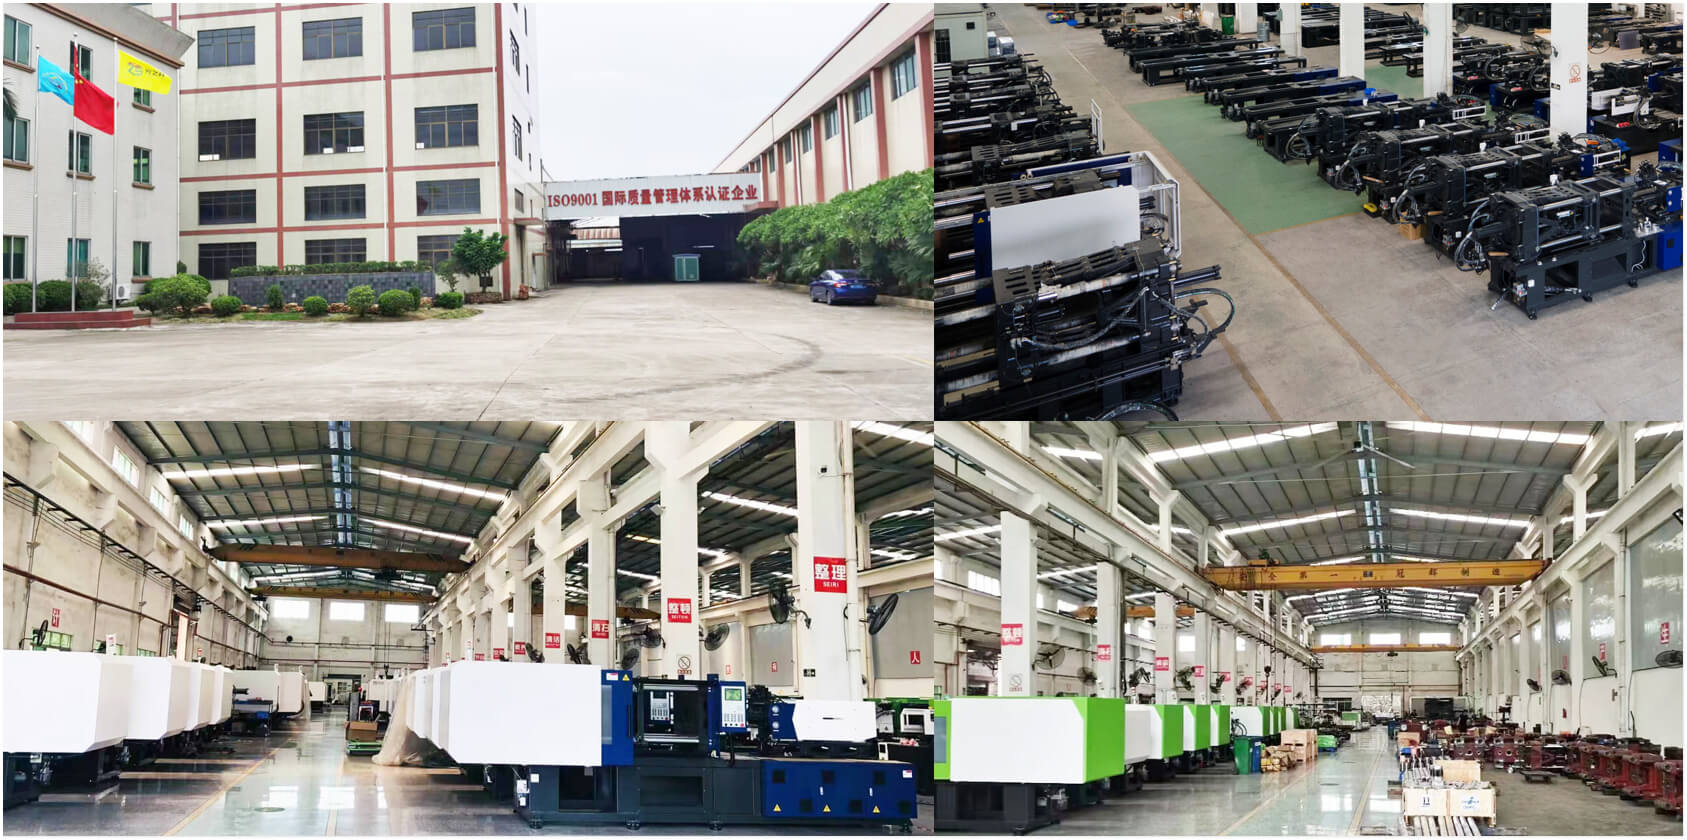 Professional Plastic injection molding machines manufacturer & supplier in China